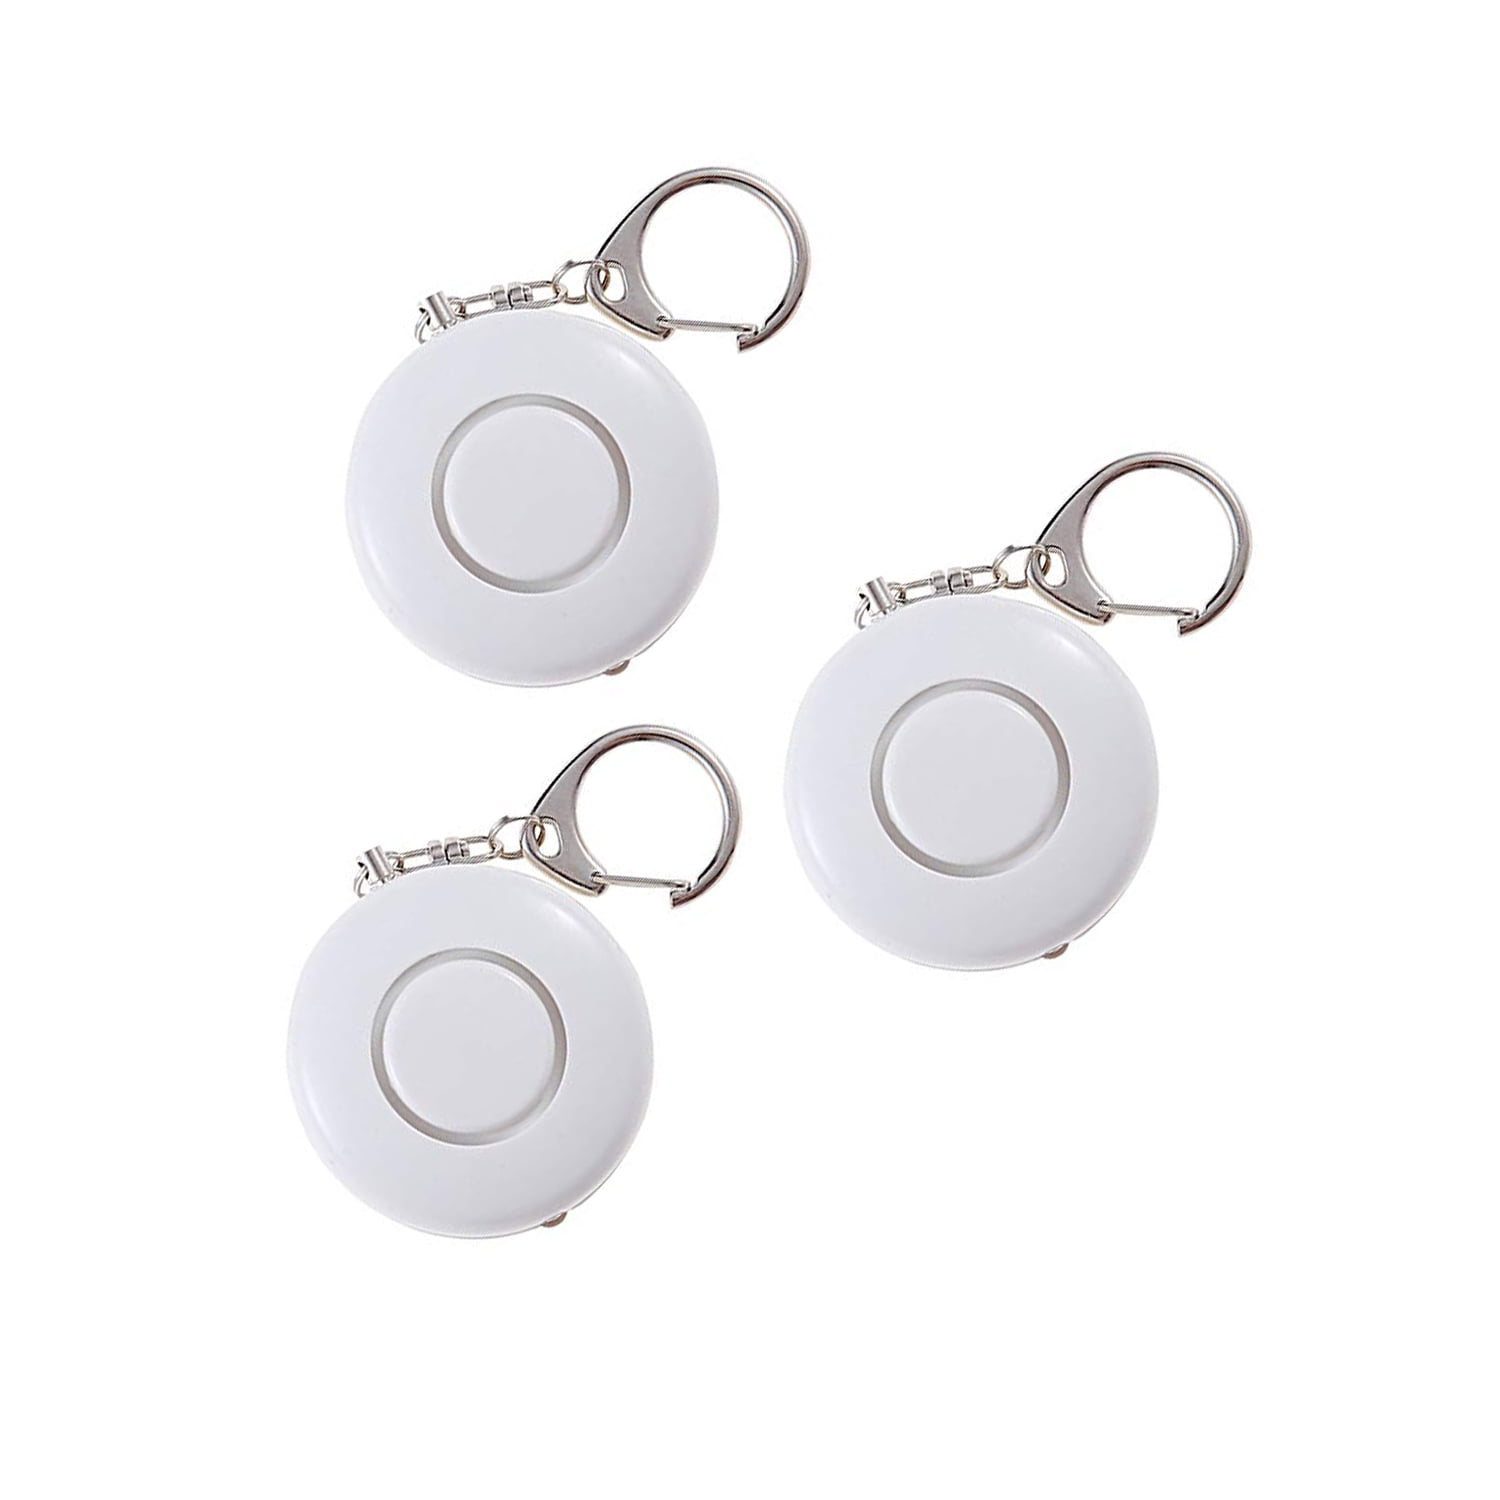 Akana Safe Sound Personal Security Alarms 140db 3Pack 130 db Personal Alarm Keychain Emergency Safety Alarm for Women Children Elderly with 3 LR44 Battery 